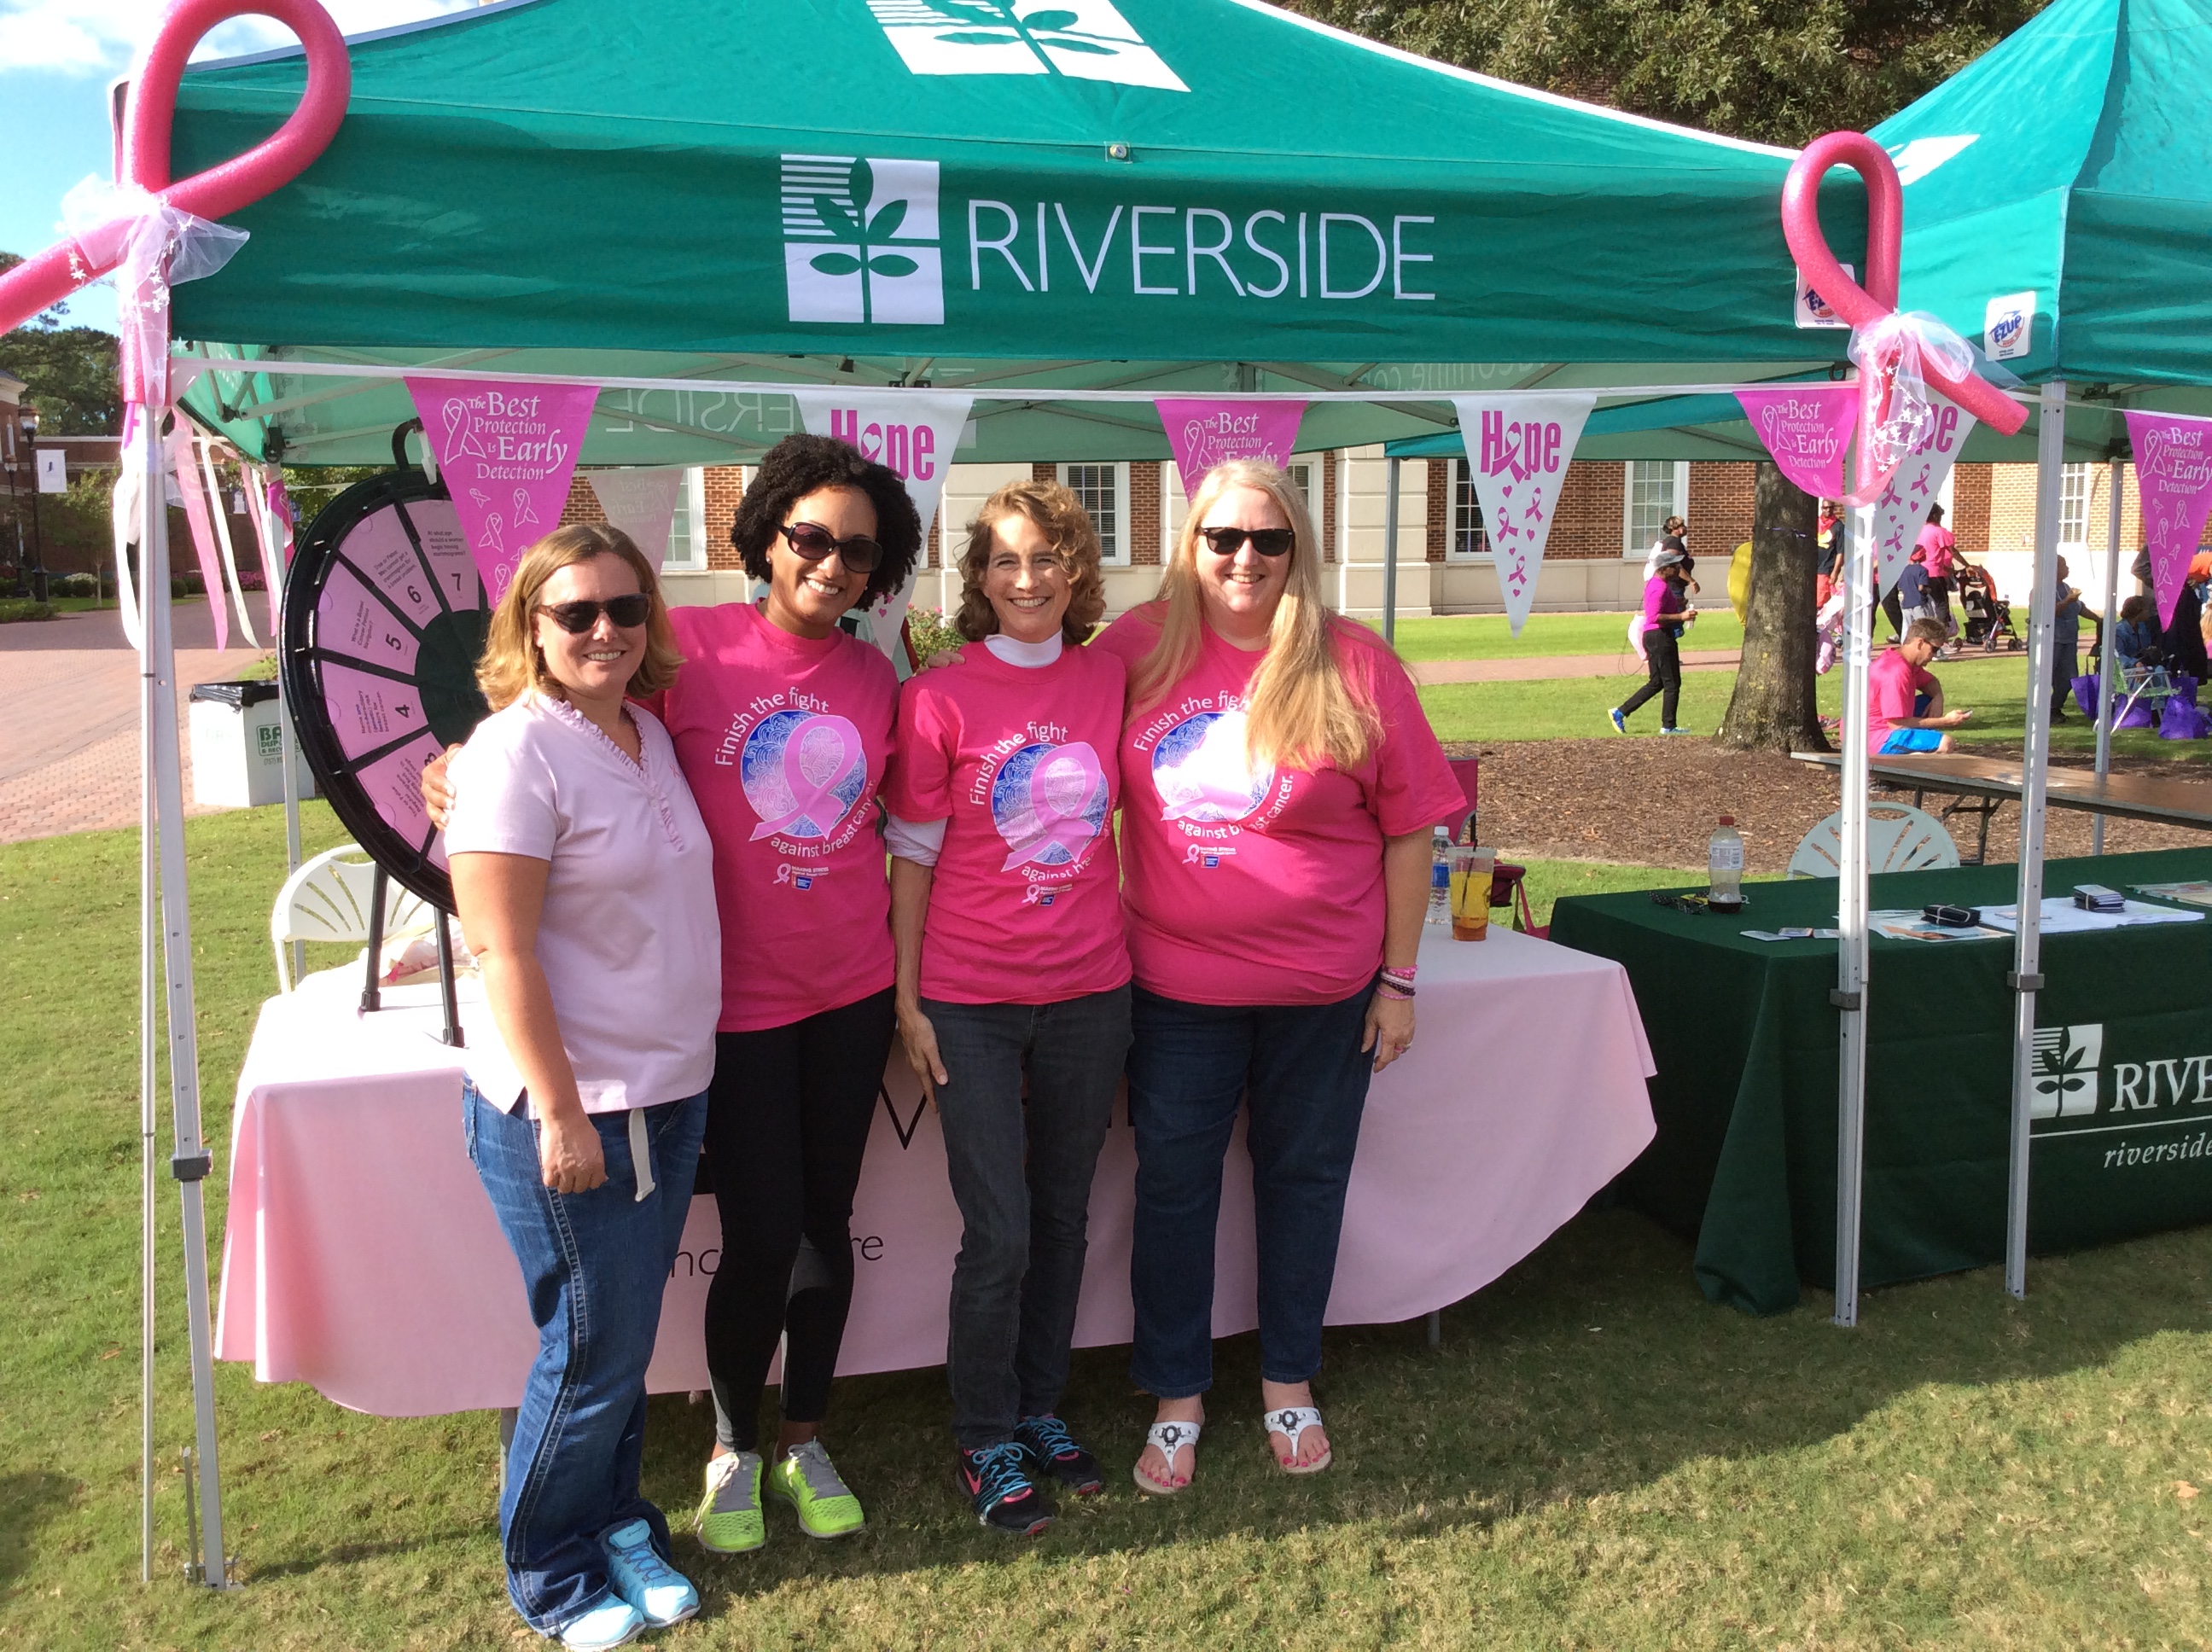 four women in pink shirts standing in front of riverside green tent